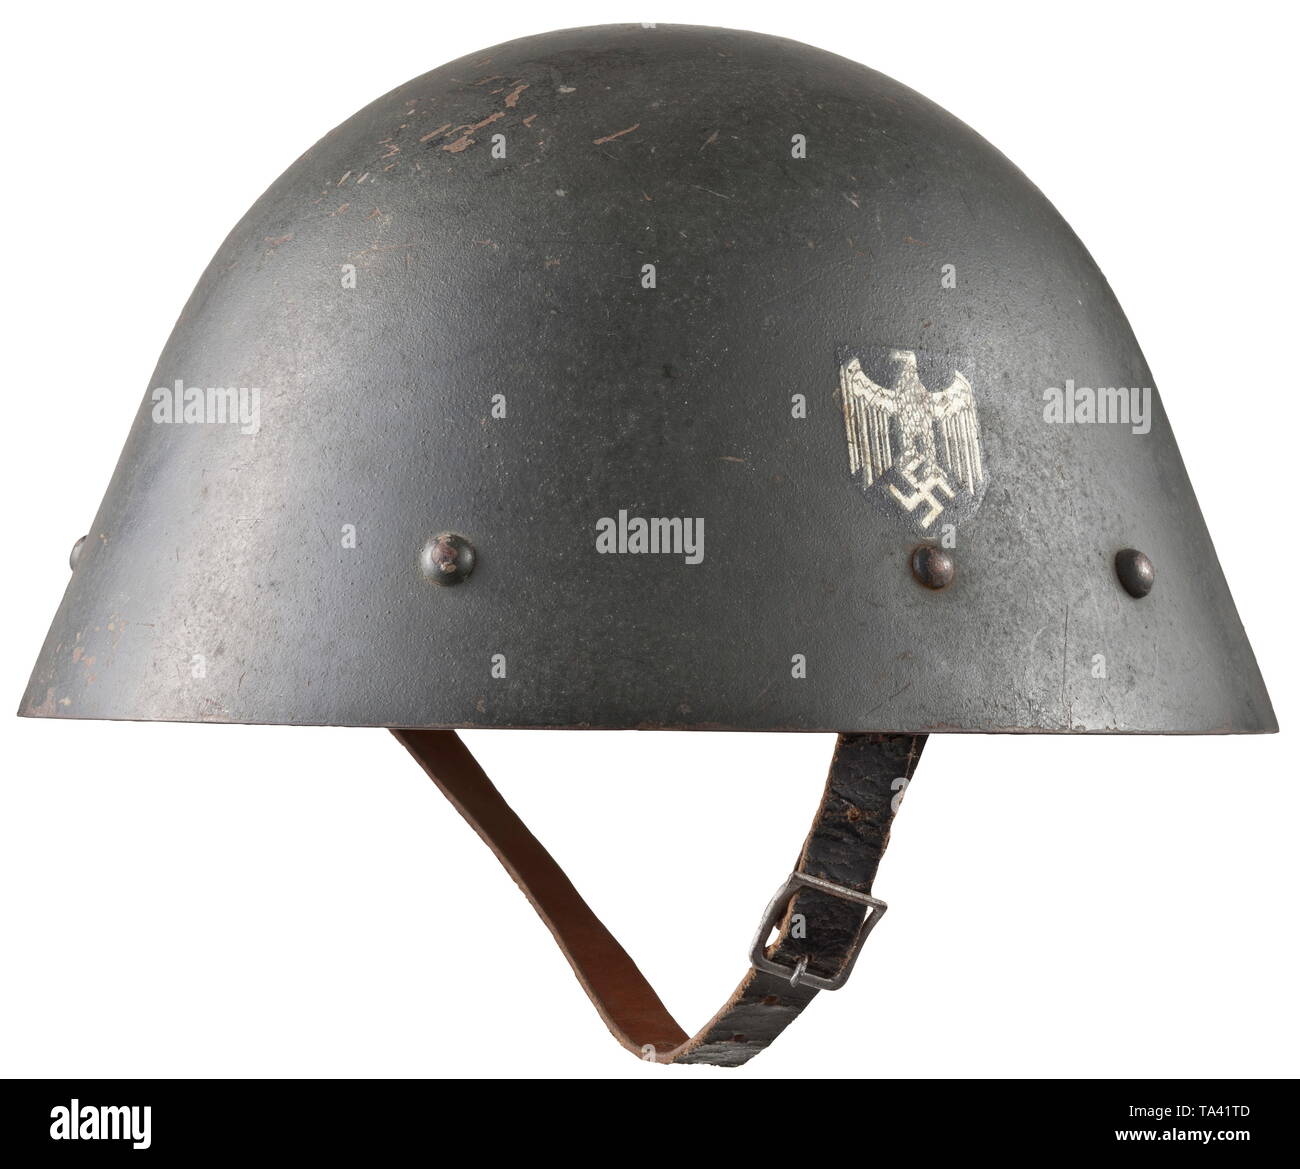 A Slovakian steel helmet M 34 appropriated for Eastern volunteers or Wehrmacht helpers Olivgrün lackierte Stahlglocke , Emblem nahezu vollständig erhalten, vollständiges Innenfutter (ein Polster beschädigt) mit Wehrmachts-Kinnriemen. historic, historical, army, armies, armed forces, military, militaria, object, objects, stills, clipping, clippings, cut out, cut-out, cut-outs, 20th century, Editorial-Use-Only Stock Photo